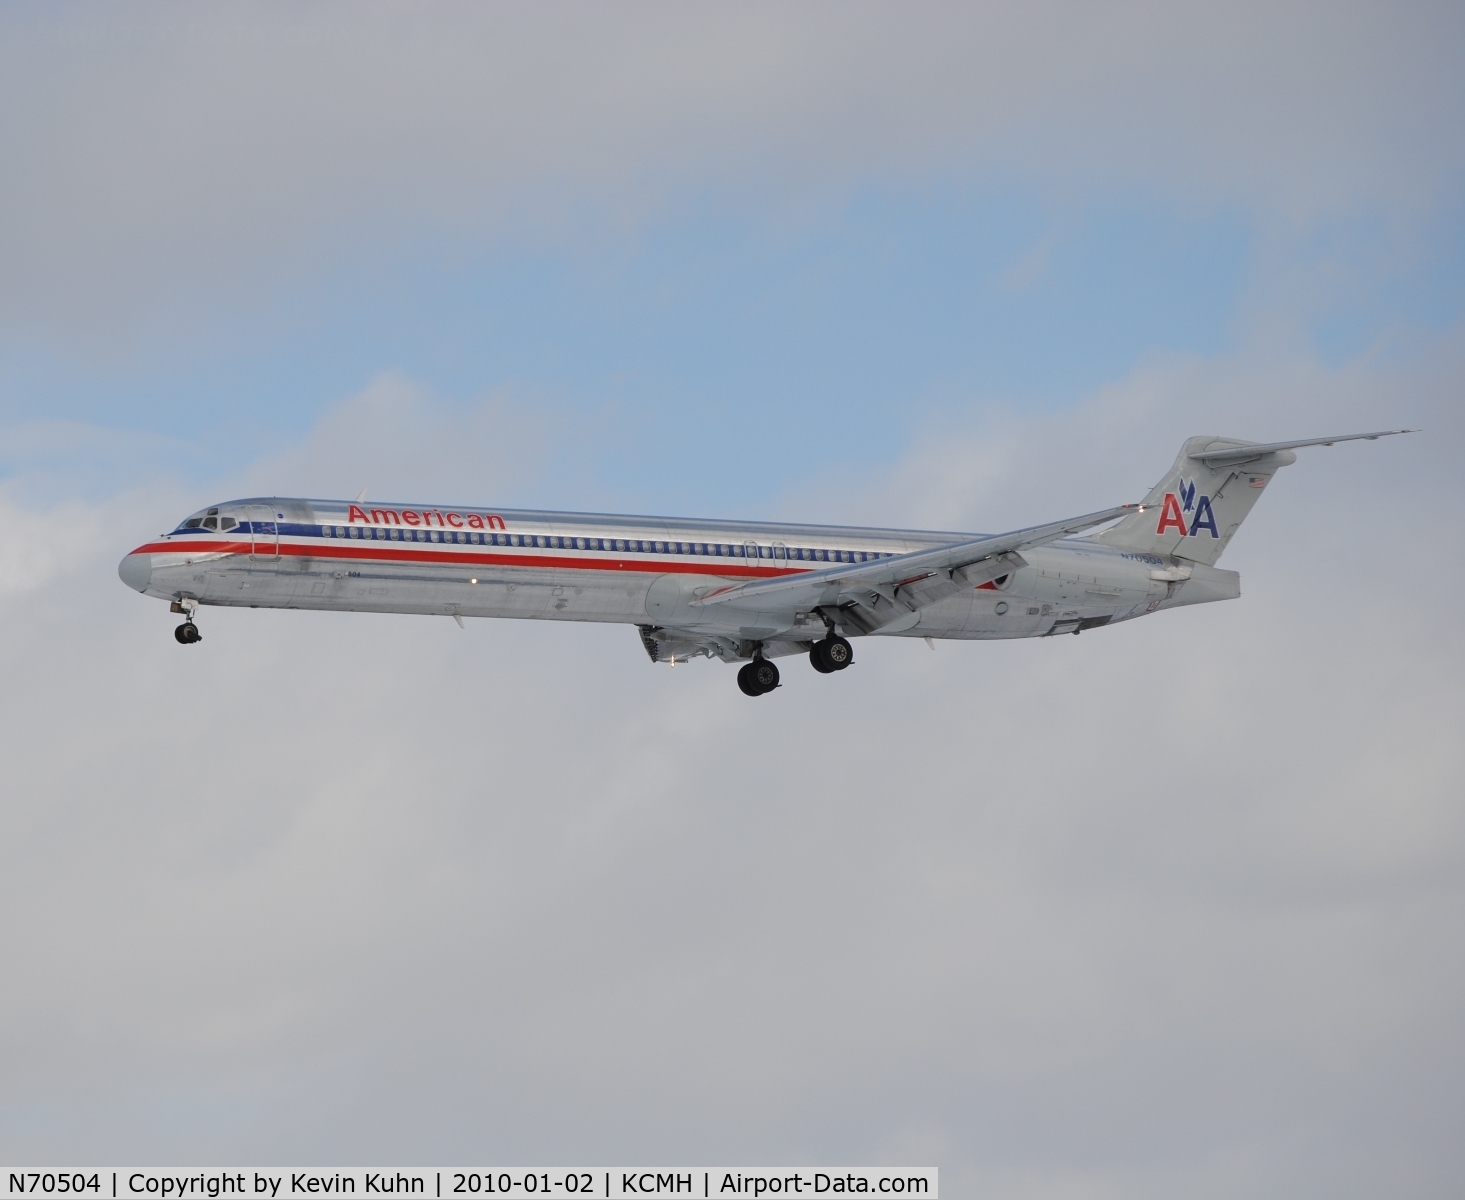 N70504, 1989 McDonnell Douglas MD-82 (DC-9-82) C/N 49798, Natural metal over the snow